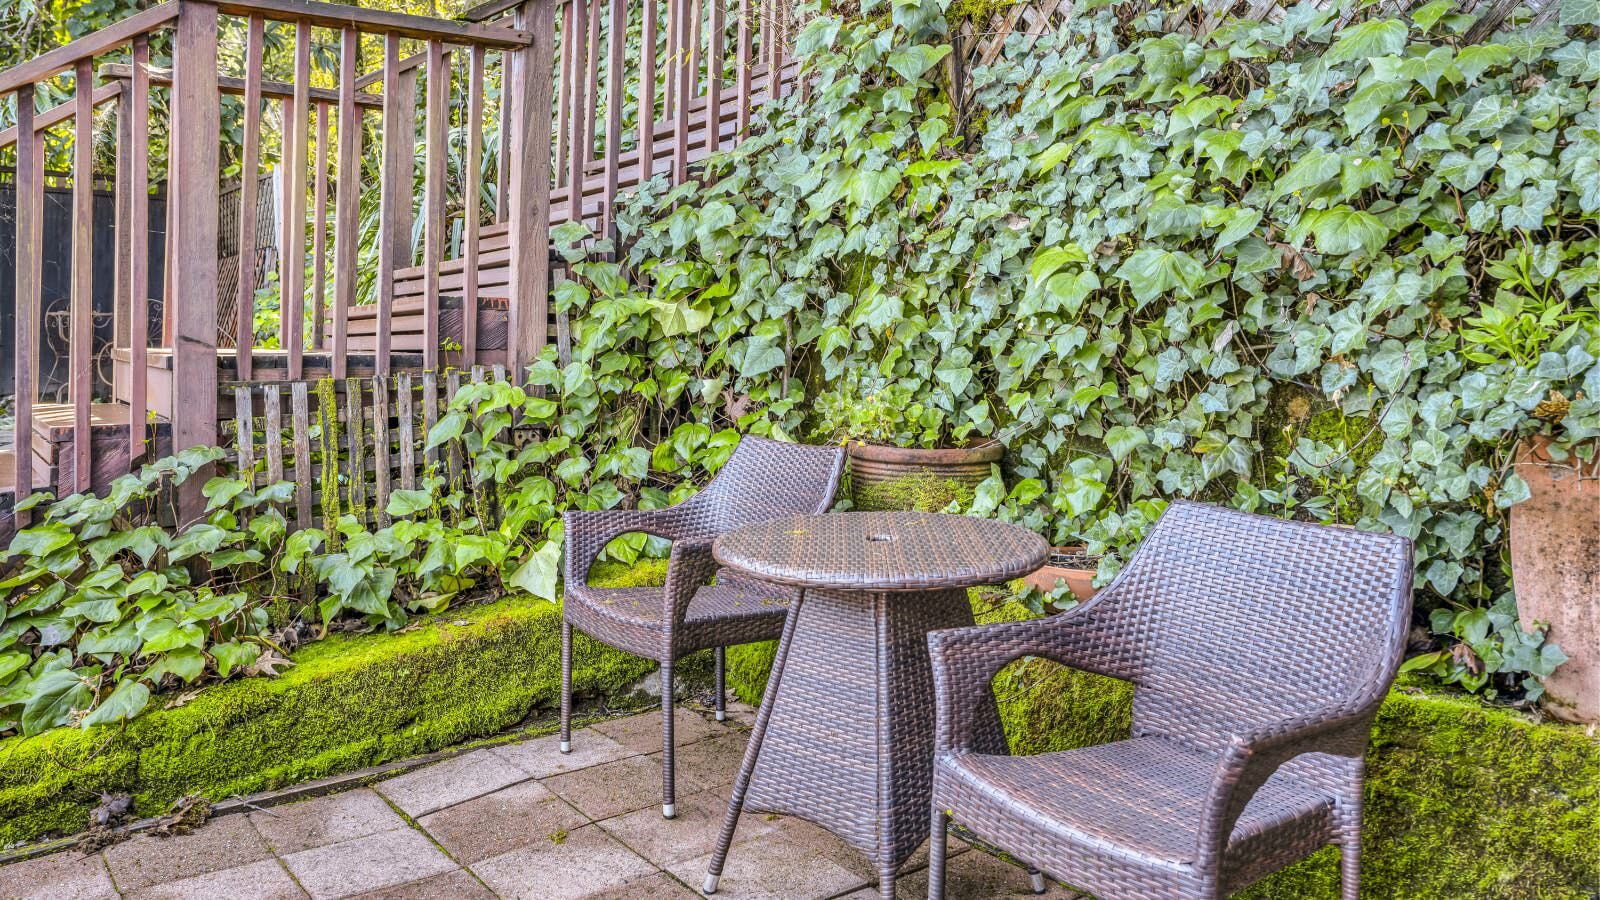 Stone patio with dark wicker chairs and table with lush green vegetation in the background